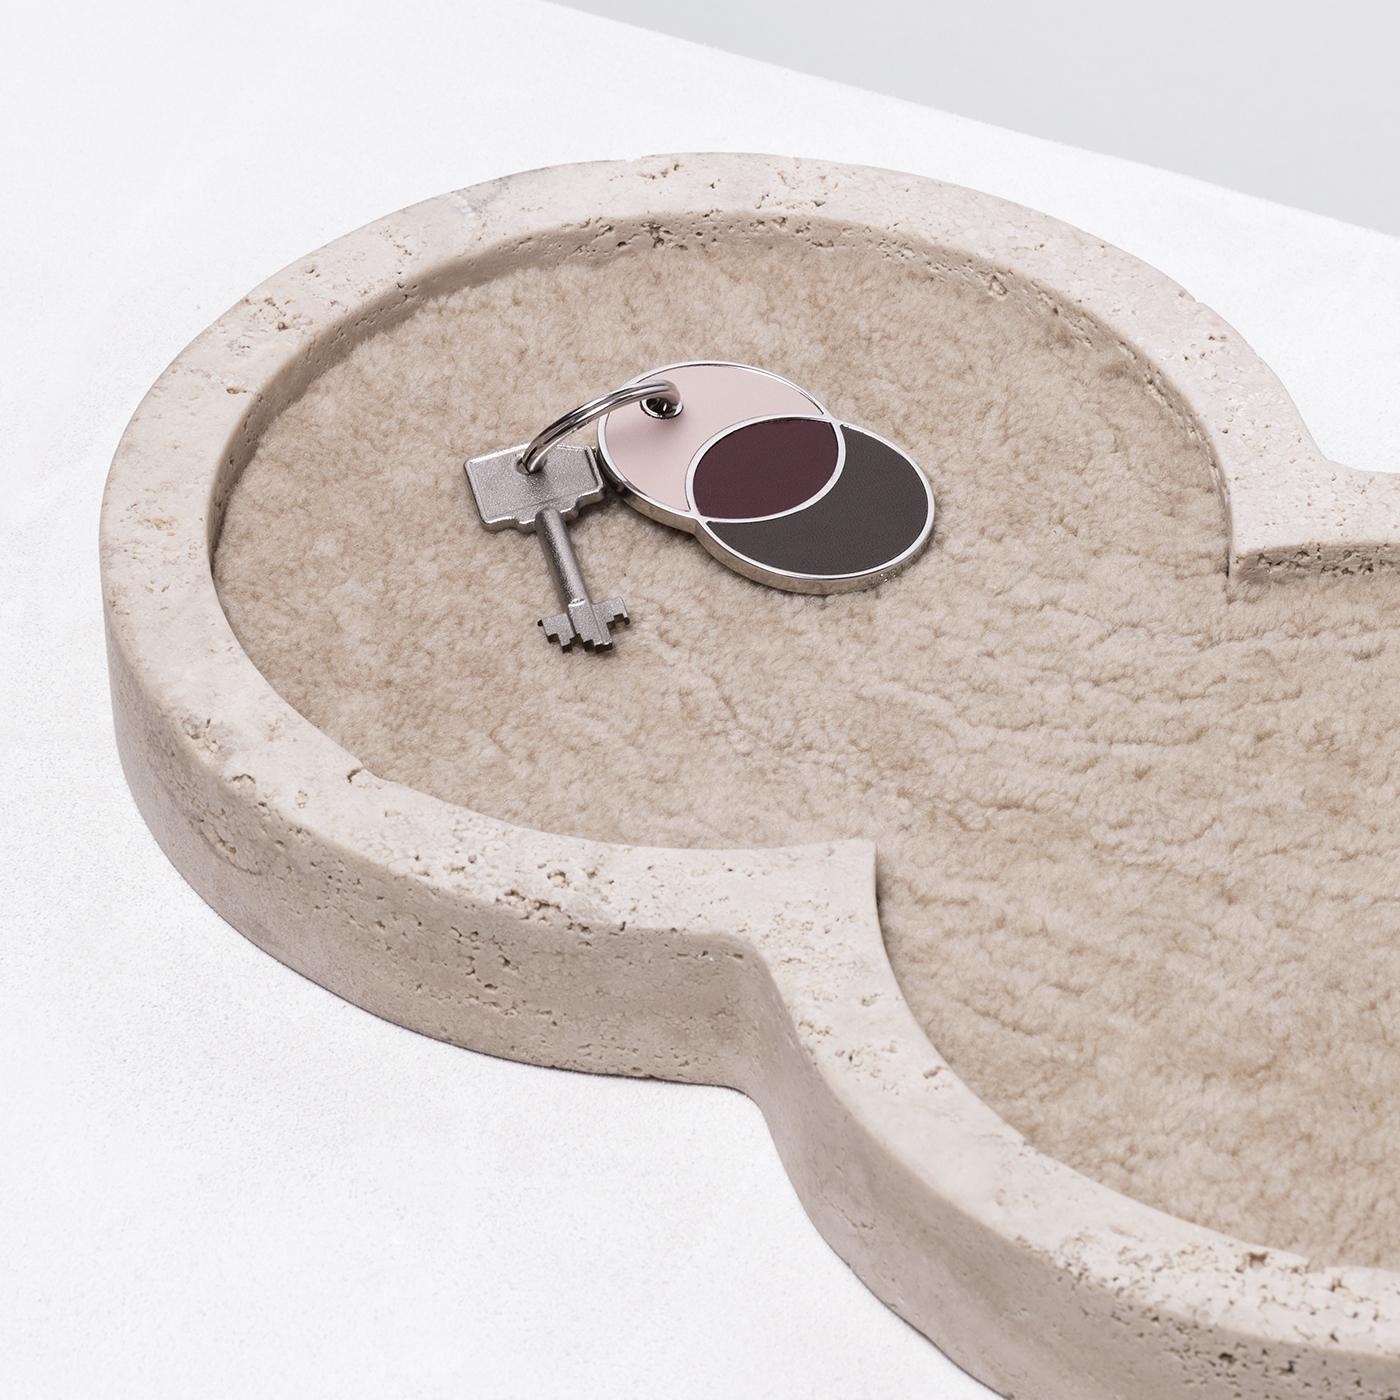 Expertly crafted in a distinctive figure-eight formation, the geometric frame of this refined valet tray is made entirely of cream-colored travertine limestone and lined in a delicate beige calfskin shearling. This harmonious combination of shapes